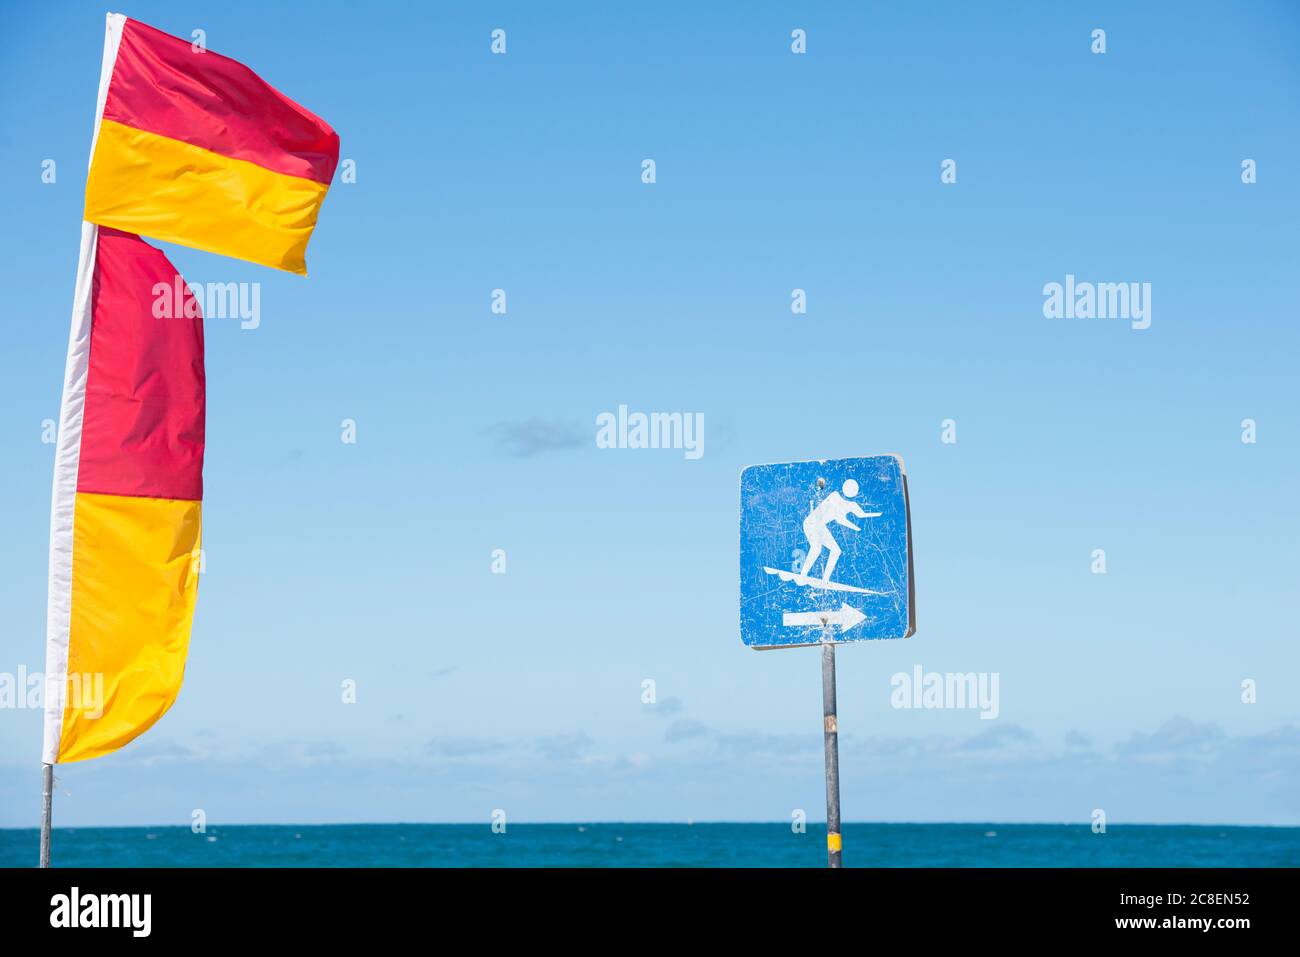 Red and yellow coloured flags of  surf live savers and surfing sign at Australian beach, with ocean and sky in blurred background and copy space. Stock Photo